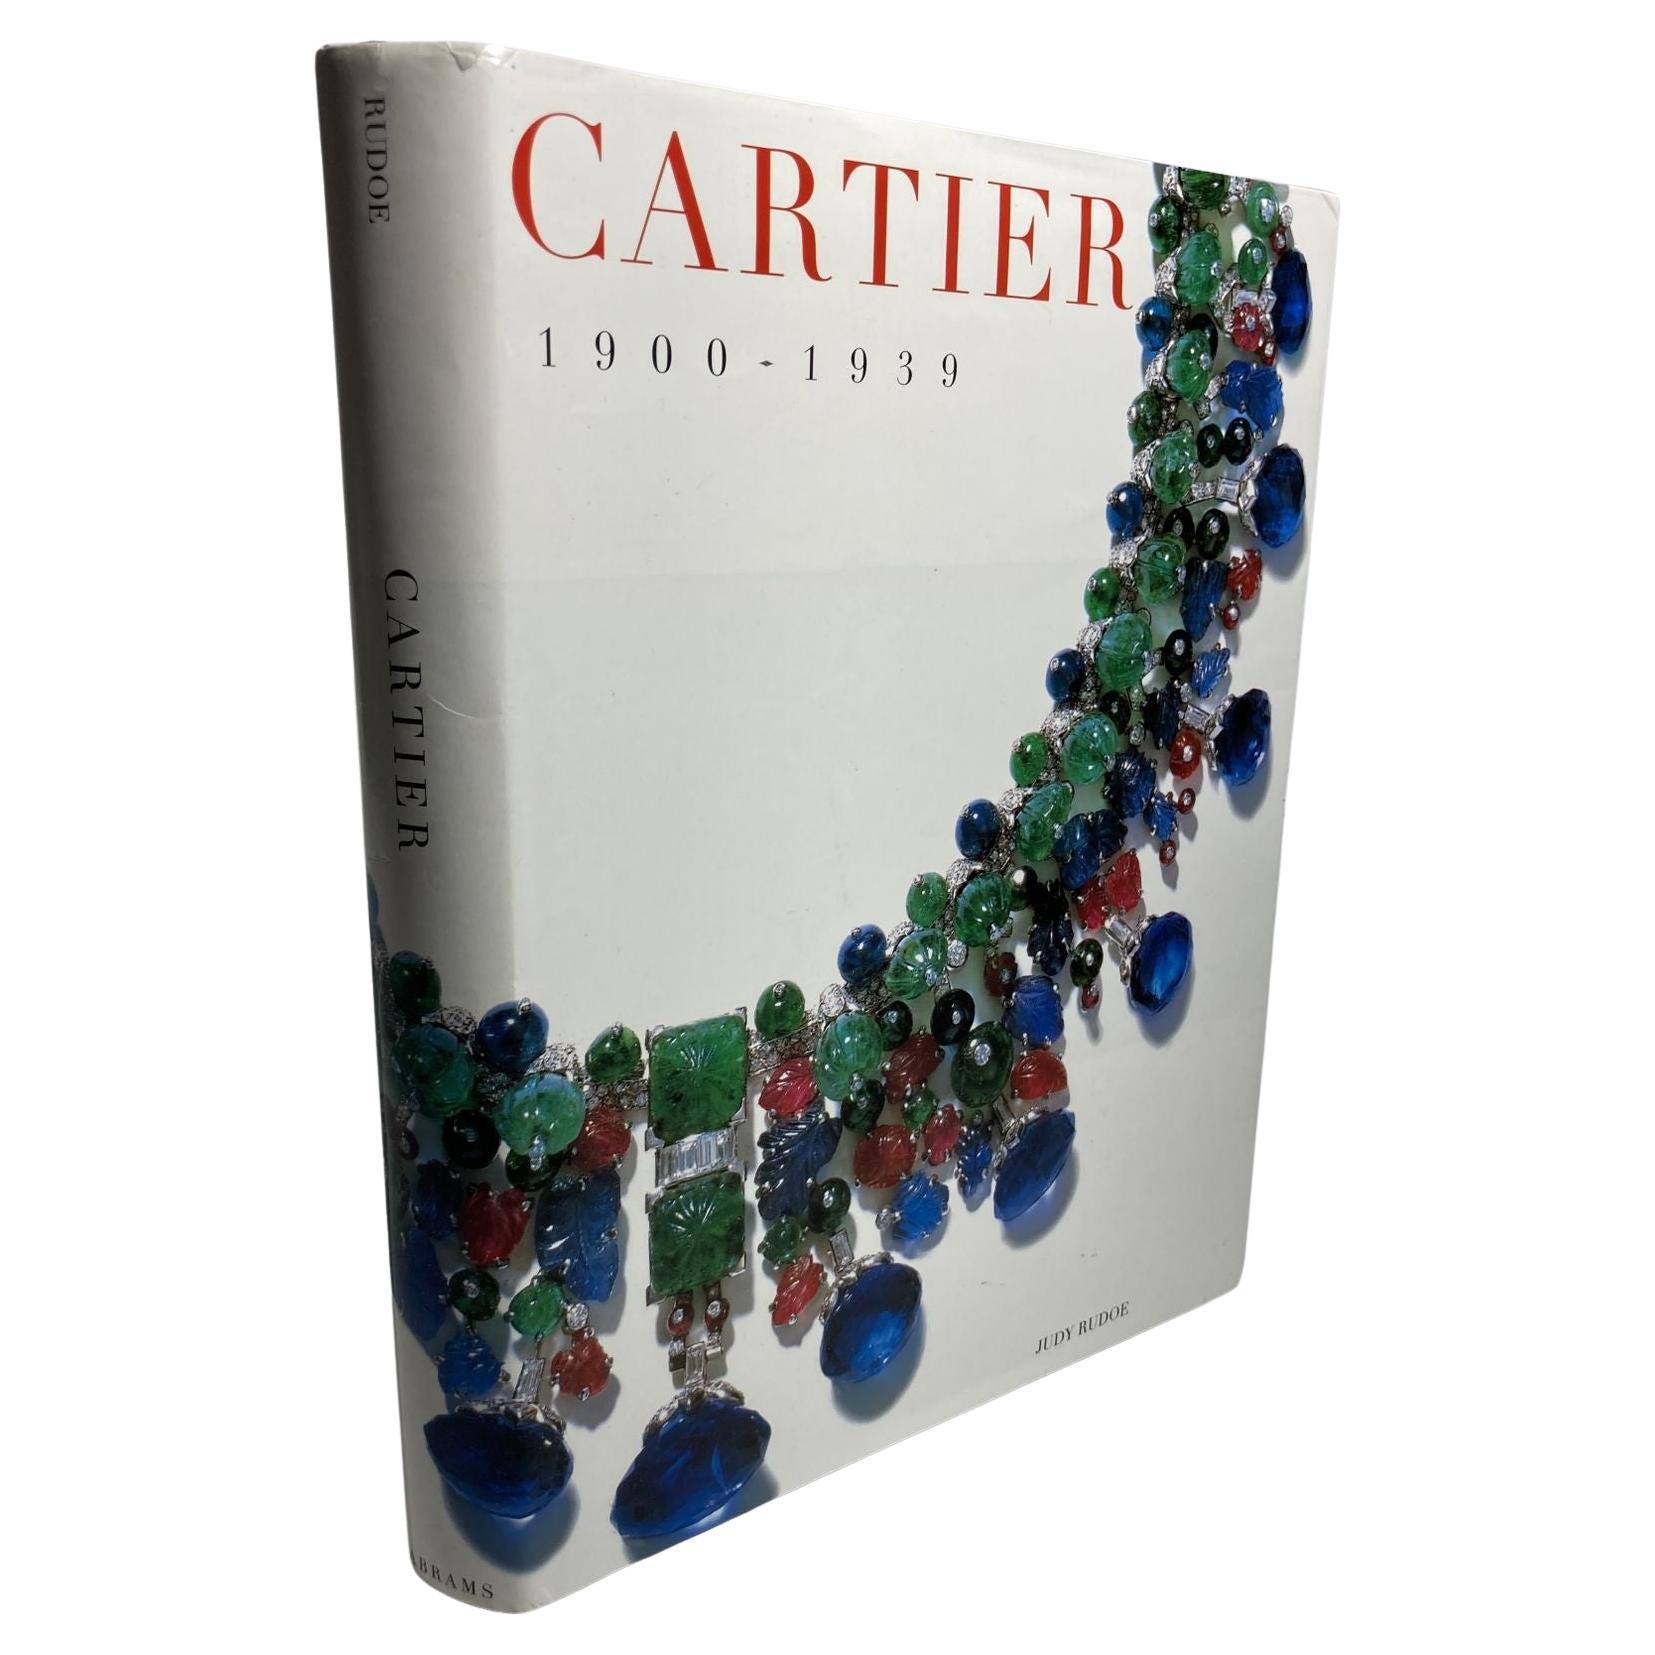 Cartier 1900 to 1939 Hardcover Book